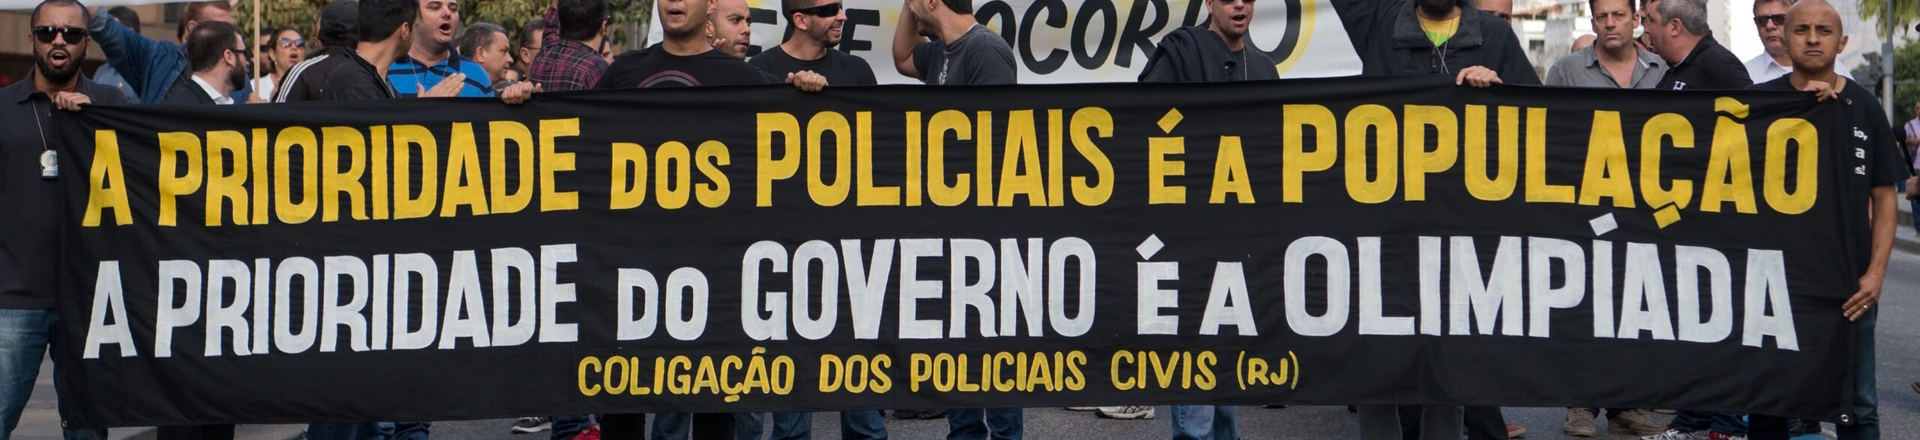 Civil police officers threatening to go on strike demonstrate against the government for arrears in their salary payments, in Rio de Janeiro, Brazil, June 27, 2016, tEarlier this month, Rio state authorities declared a "state of public calamity" over a major budget crisis in order to release emergency funds to finance the Olympic Games due to begin in August. / AFP / VANDERLEI ALMEIDA (Photo credit should read VANDERLEI ALMEIDA/AFP/Getty Images)